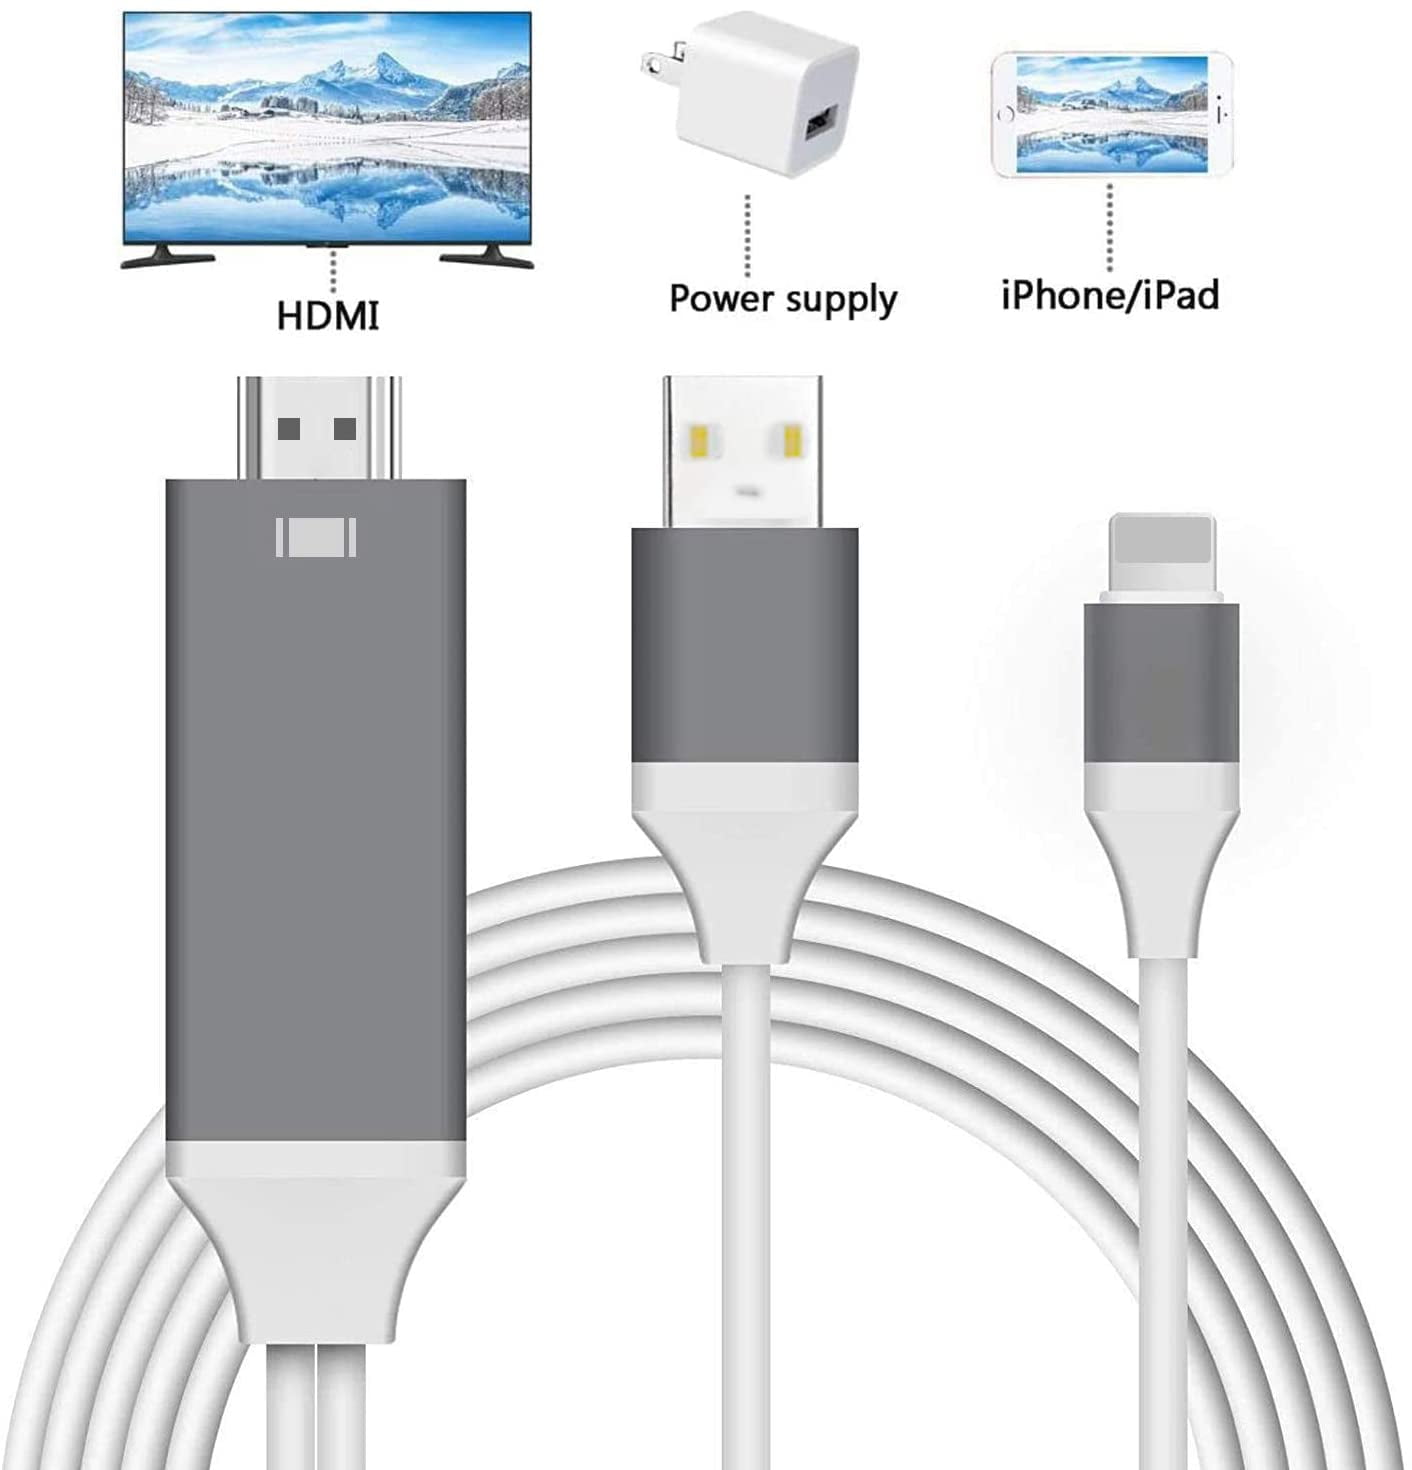 Compatible with iPhone to HDMI Adapter Cable, Phone to TV Cable,HDMI - Ver Ipad En Tv Con Cable Hdmi